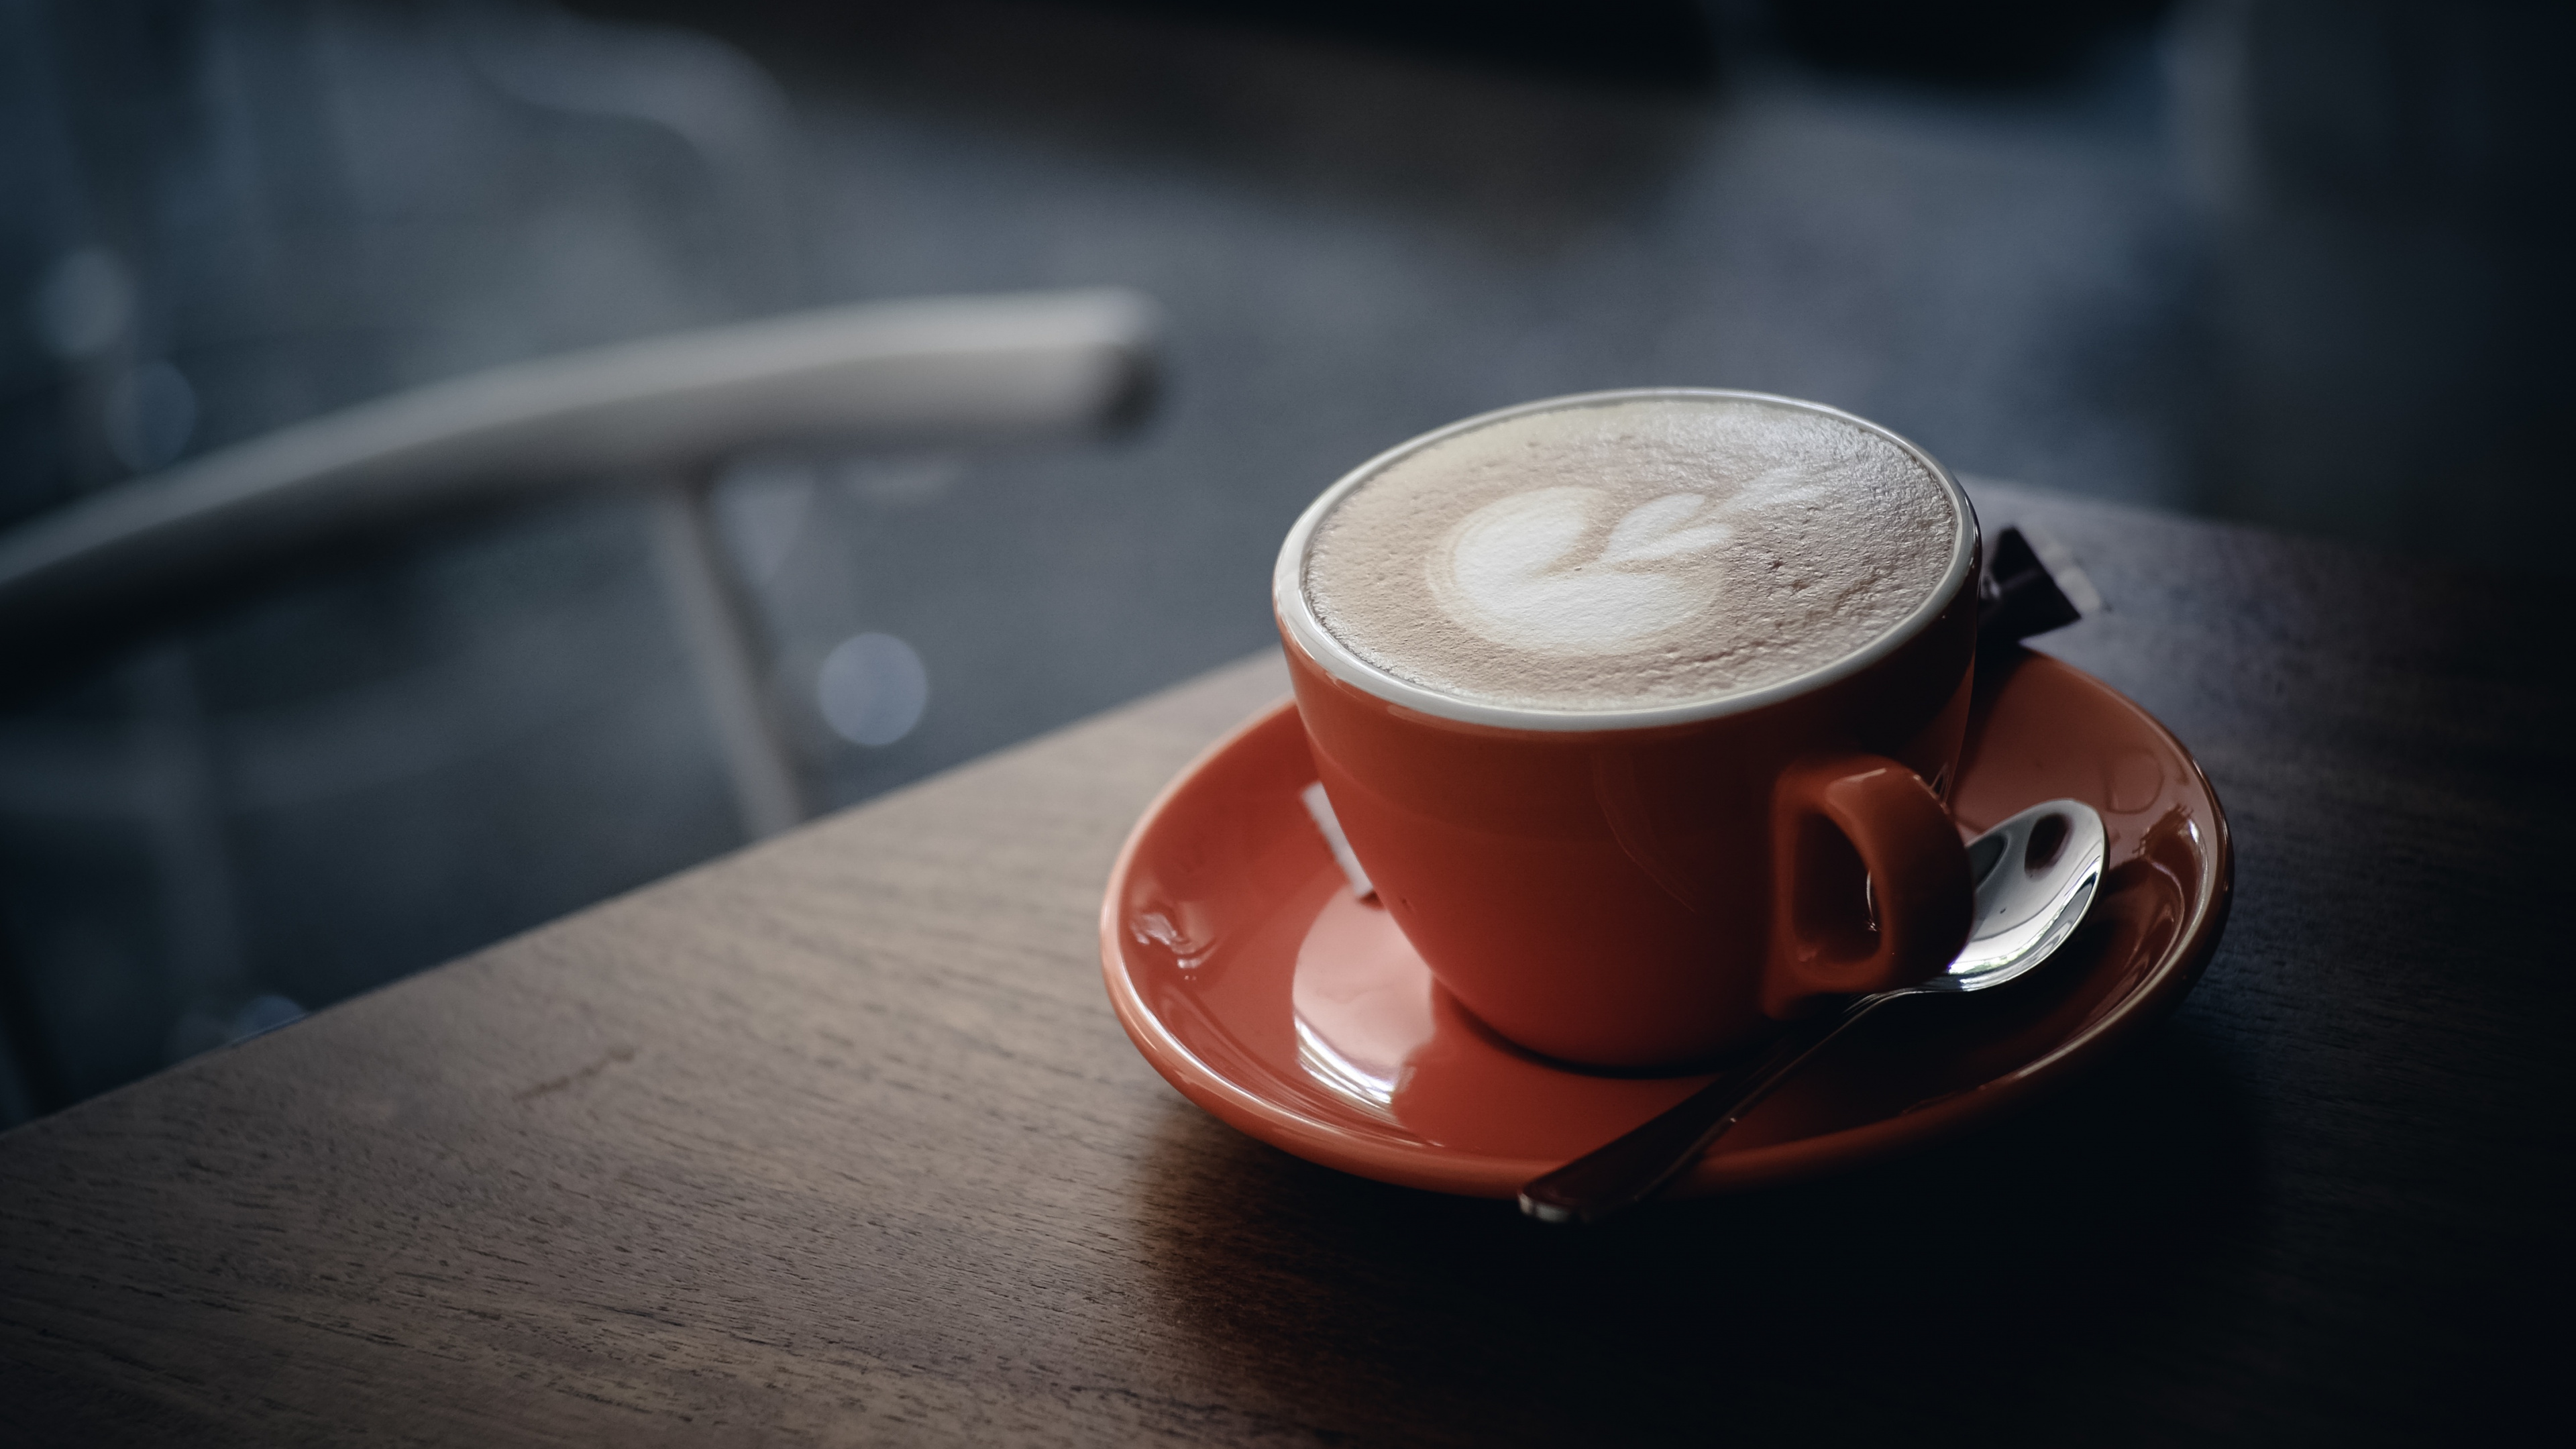 Red Ceramic Mug With Coffee on Orange Saucer. Wallpaper in 3840x2160 Resolution